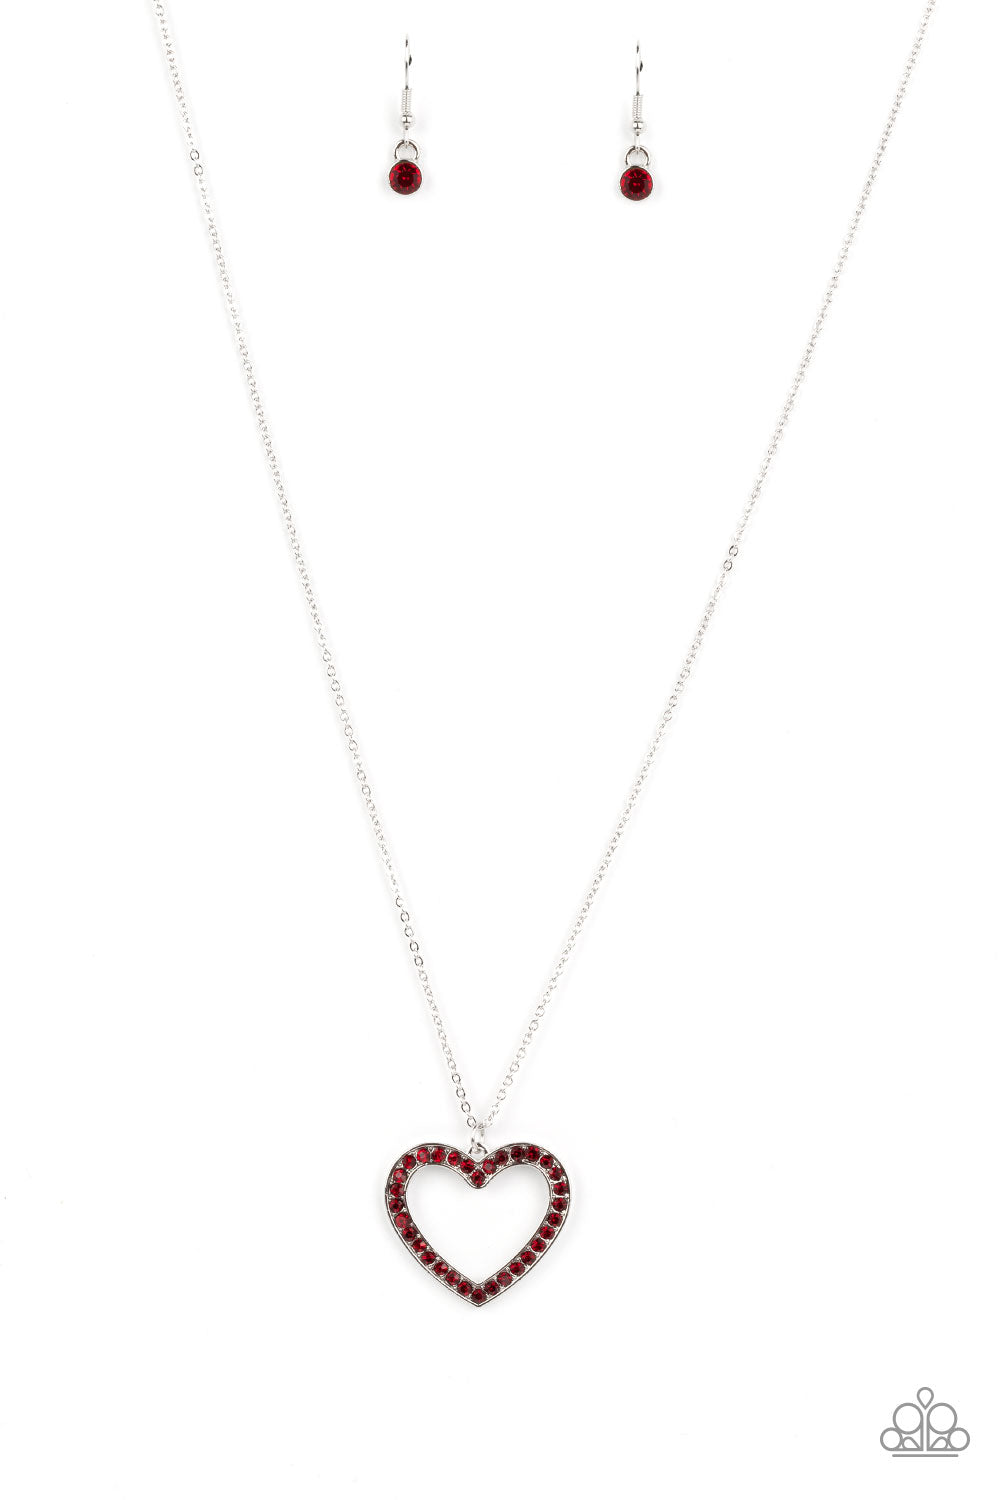 Dainty Darling - Red Rhinestone Encrusted Heart Pendant Paparazzi Necklace & matching earrings